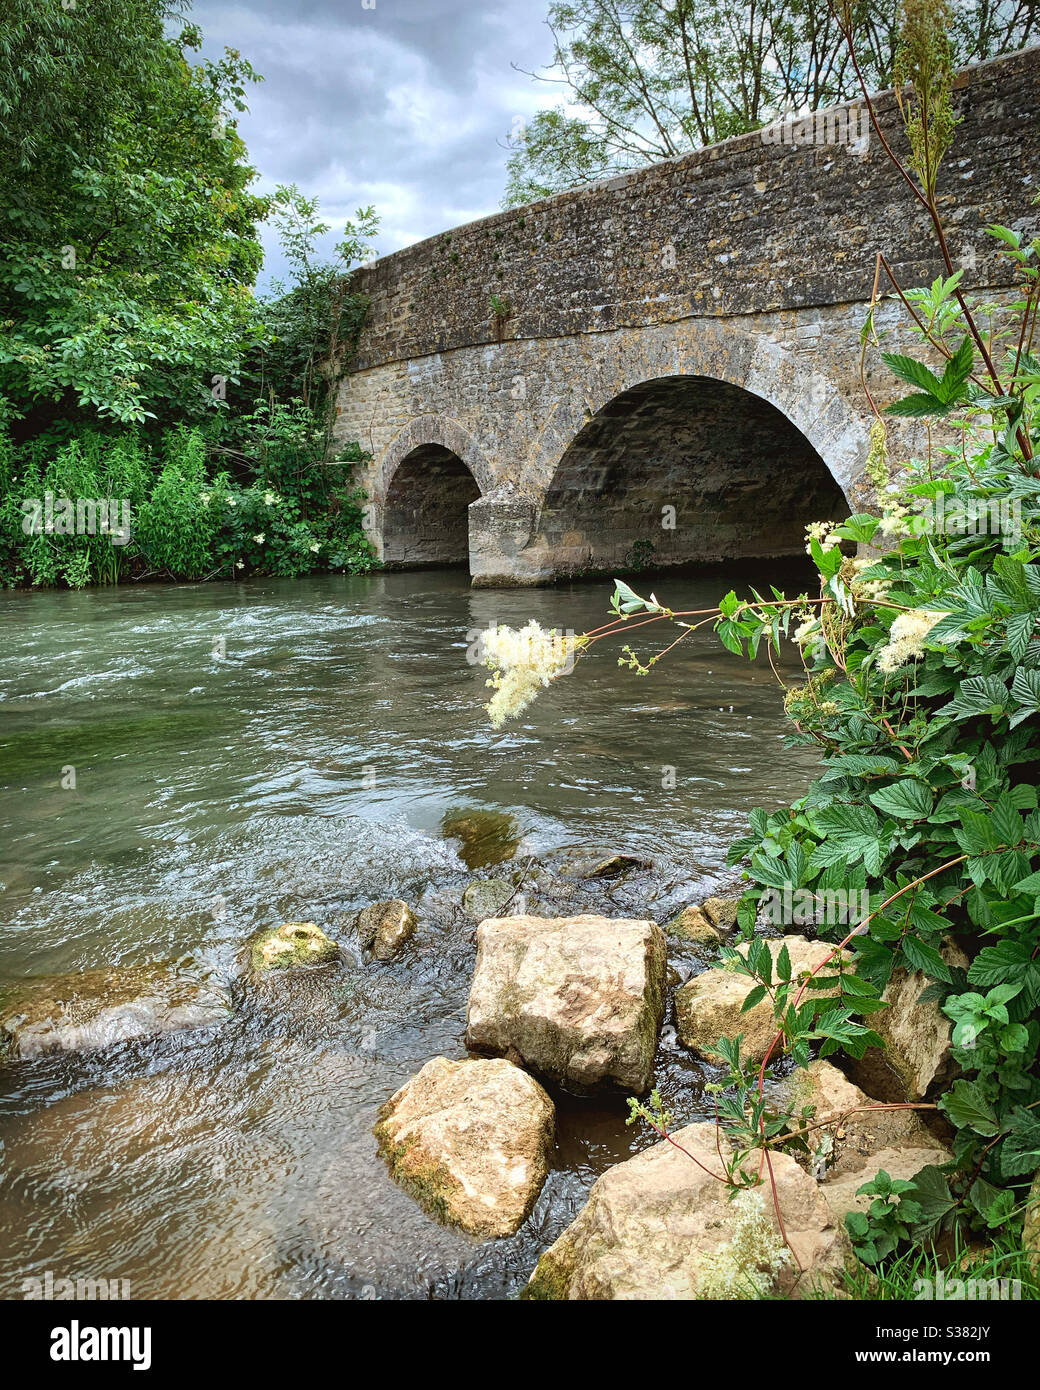 Water running underneath a bridge. The River Windrush near the village of Asthall, Oxfordshire in the Cotswolds. Stock Photo